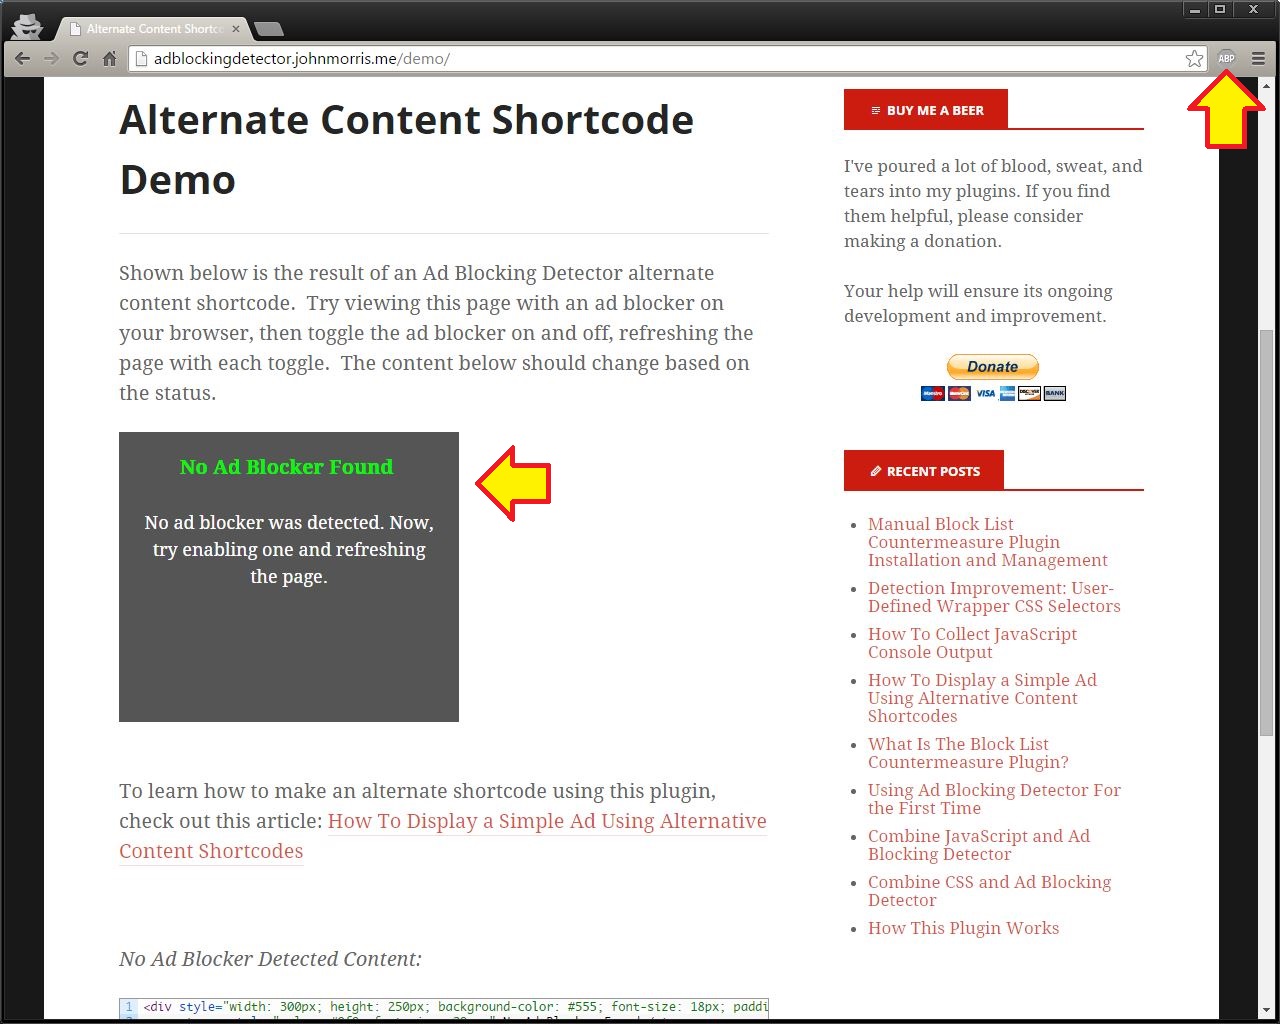 Demo of Alternative Shortcode w/ Disabled Ad Blocker ([click here to test a live demo](http://adblockingdetector.johnmorris.me/demo/))